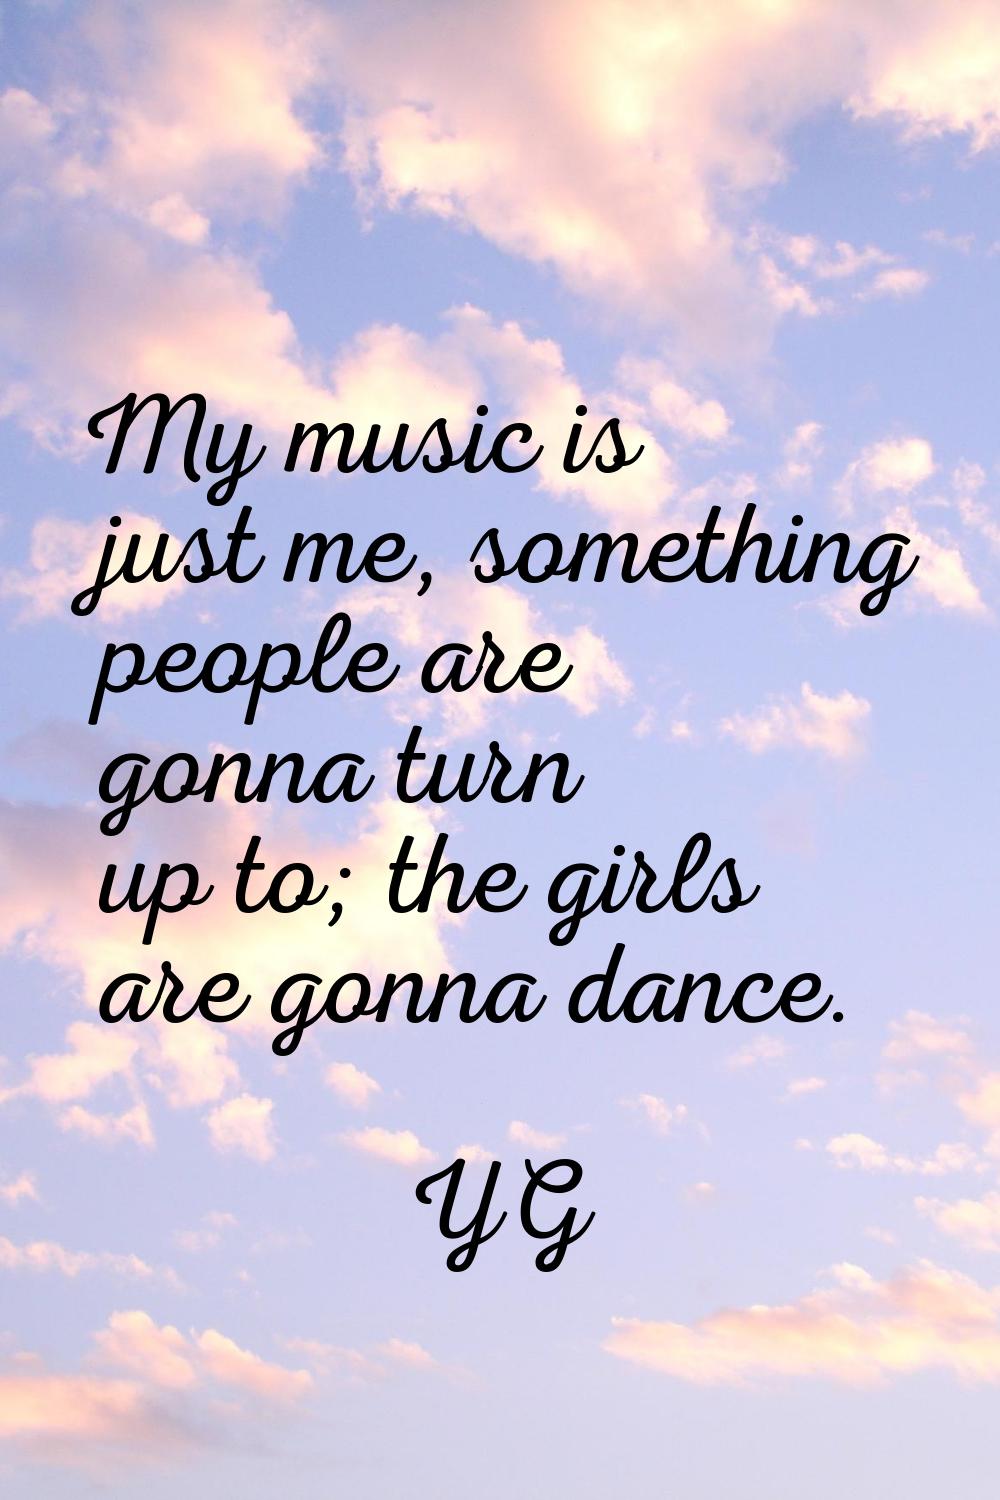 My music is just me, something people are gonna turn up to; the girls are gonna dance.